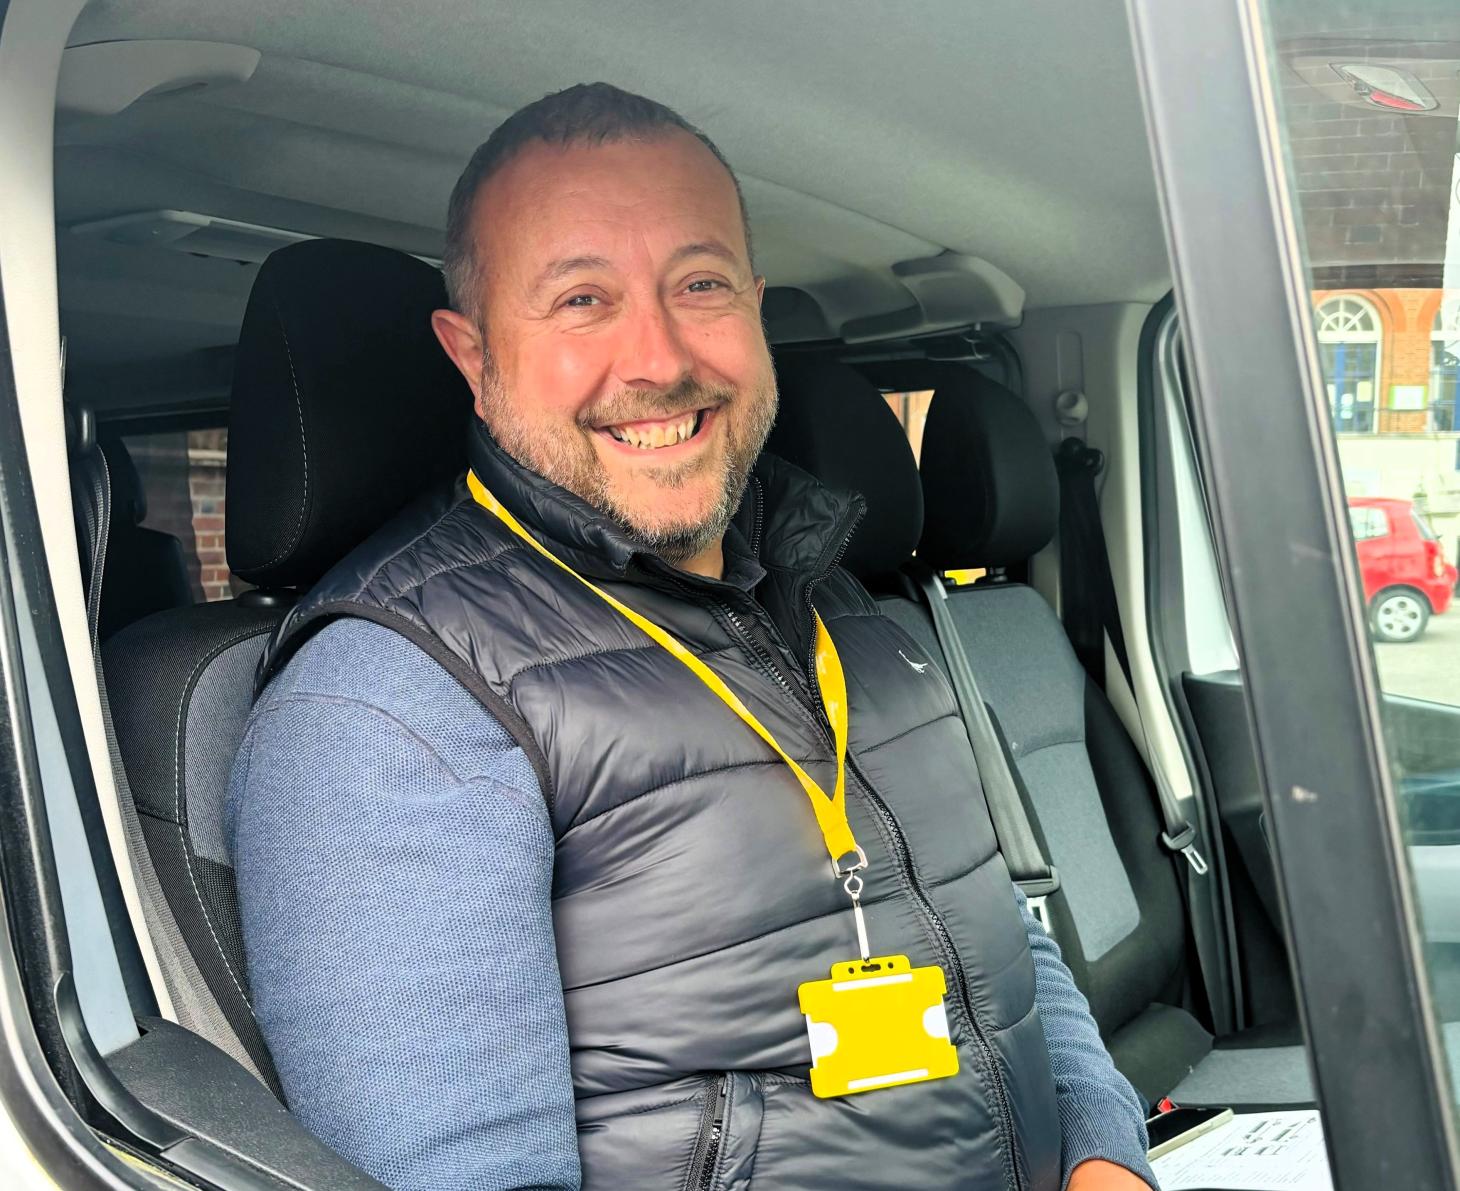 Graham sits in a van, smiling. He is wearing a yellow lanyard.